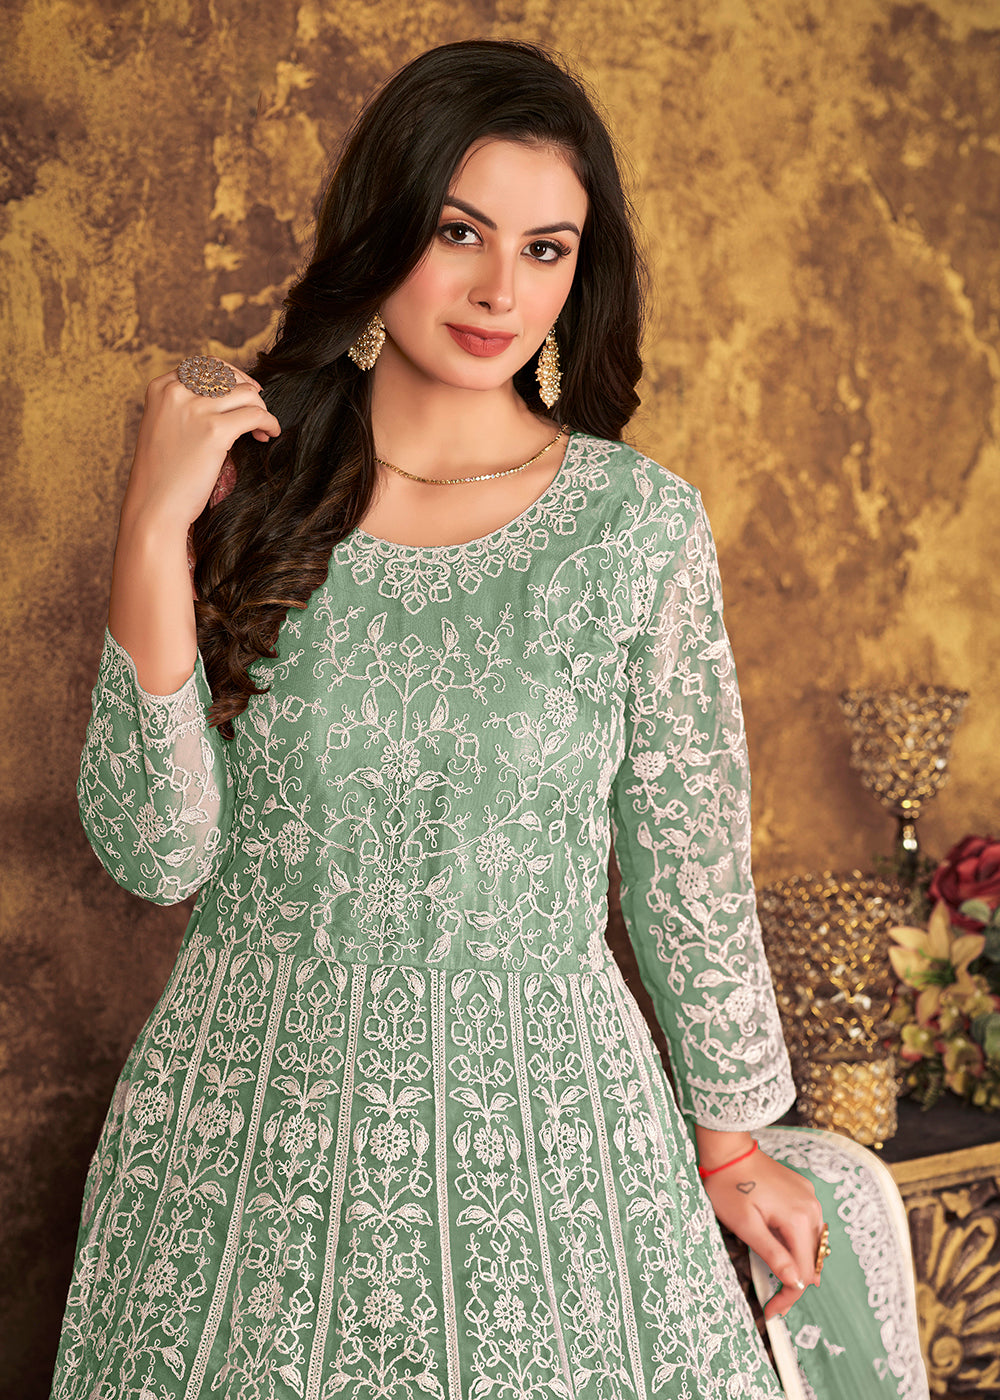 Buy Now Tempting Sea Green Cording Embroidered Wedding Anarkali Dress Online in Canada at Empress Clothing. 